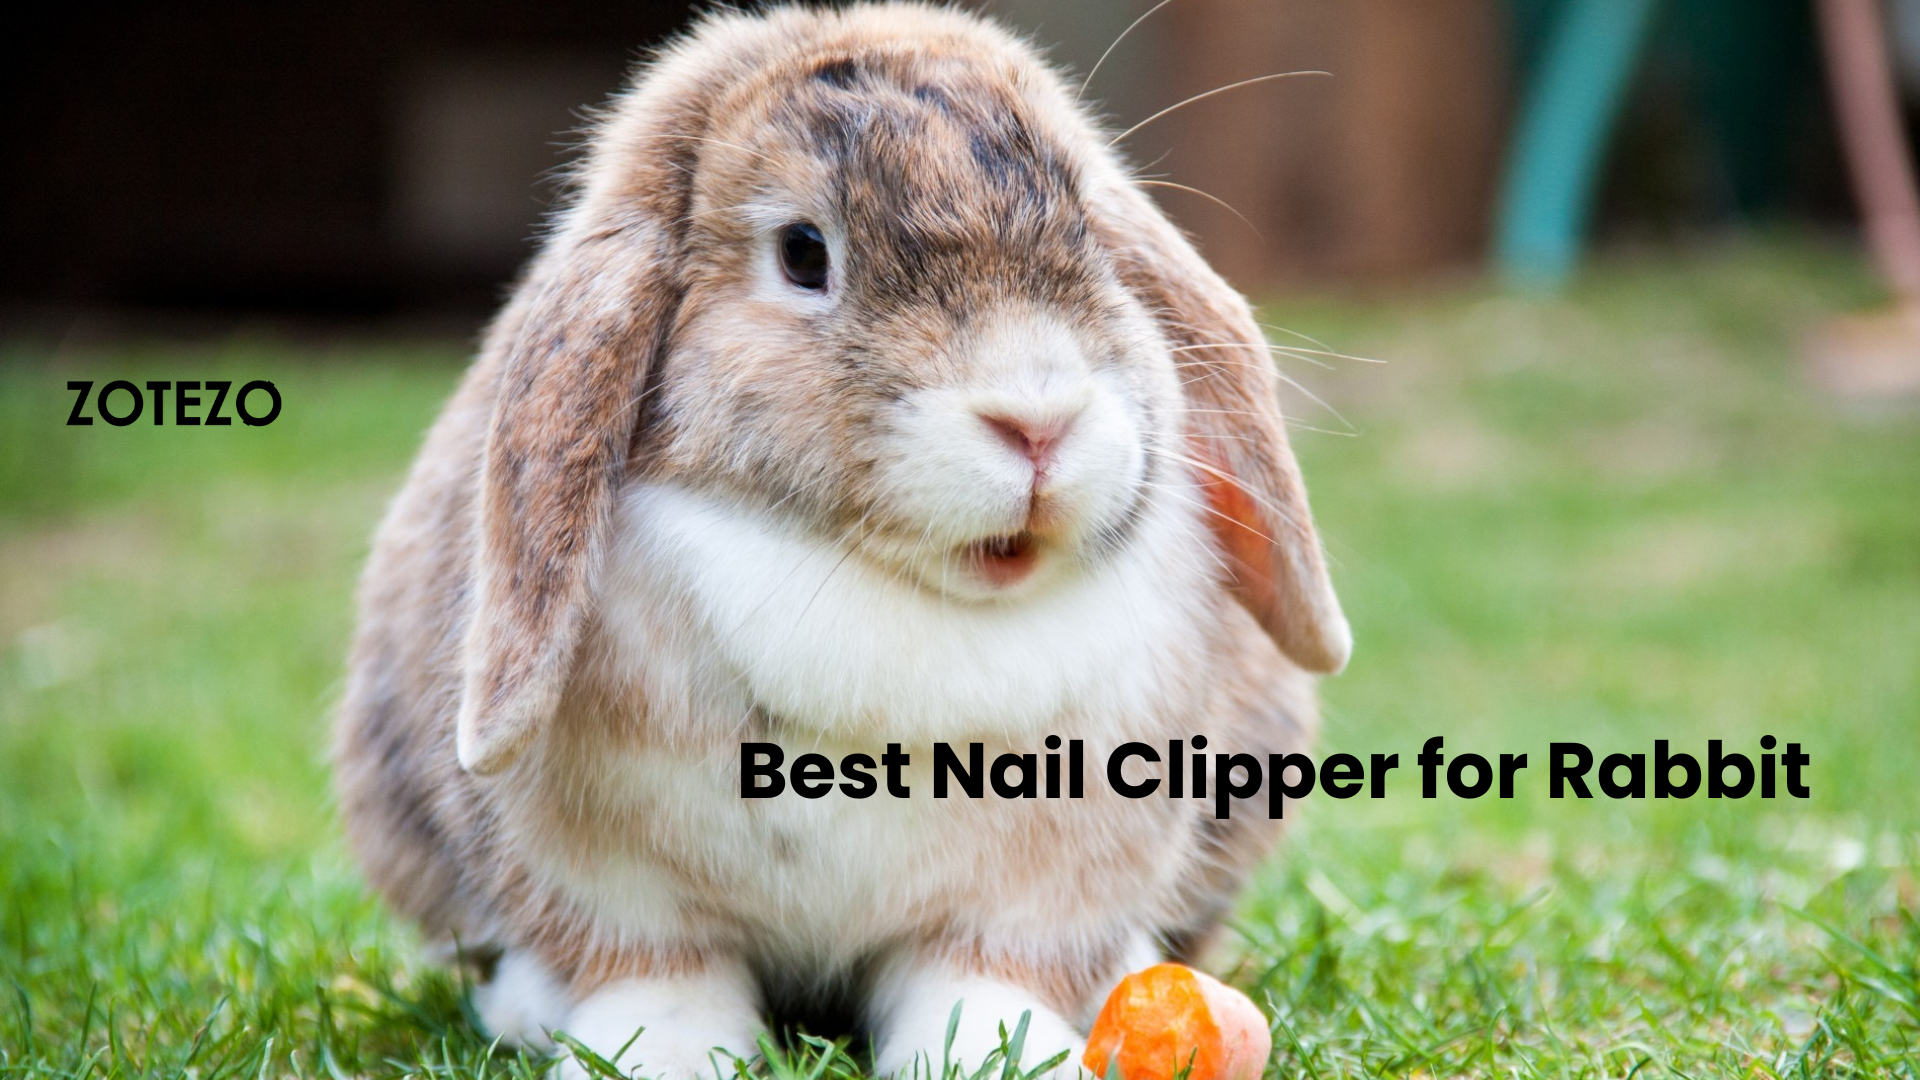 Nail Clippers for Rabbits in the World